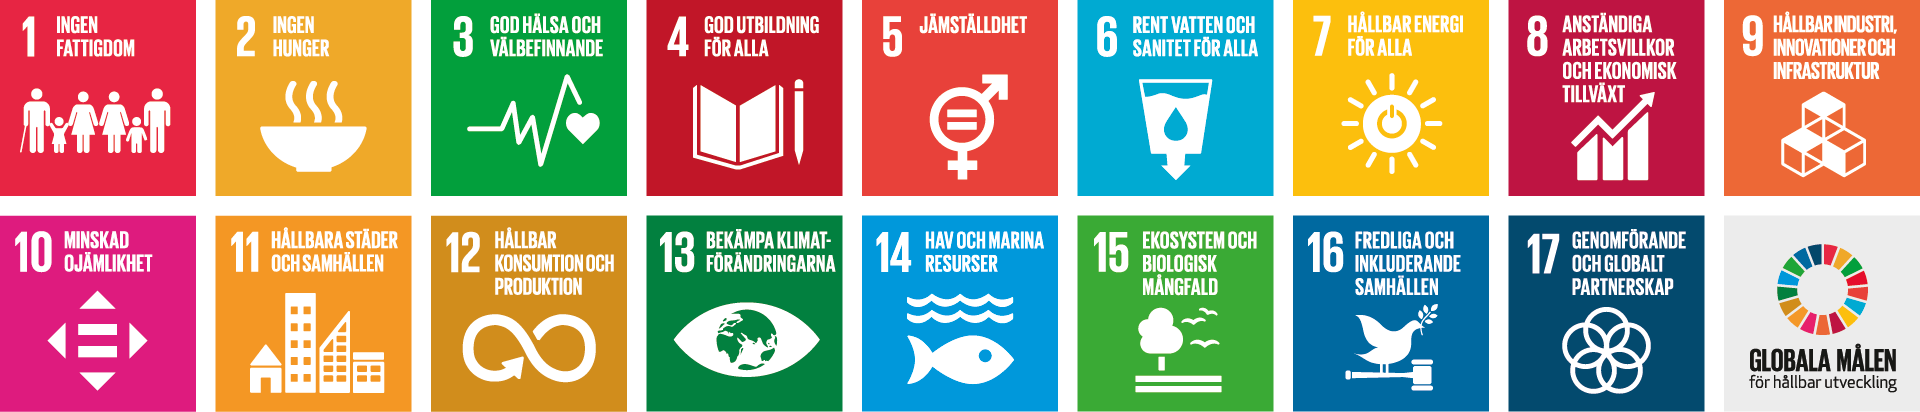 Graphic image with the UN's 17 global sustainability goals